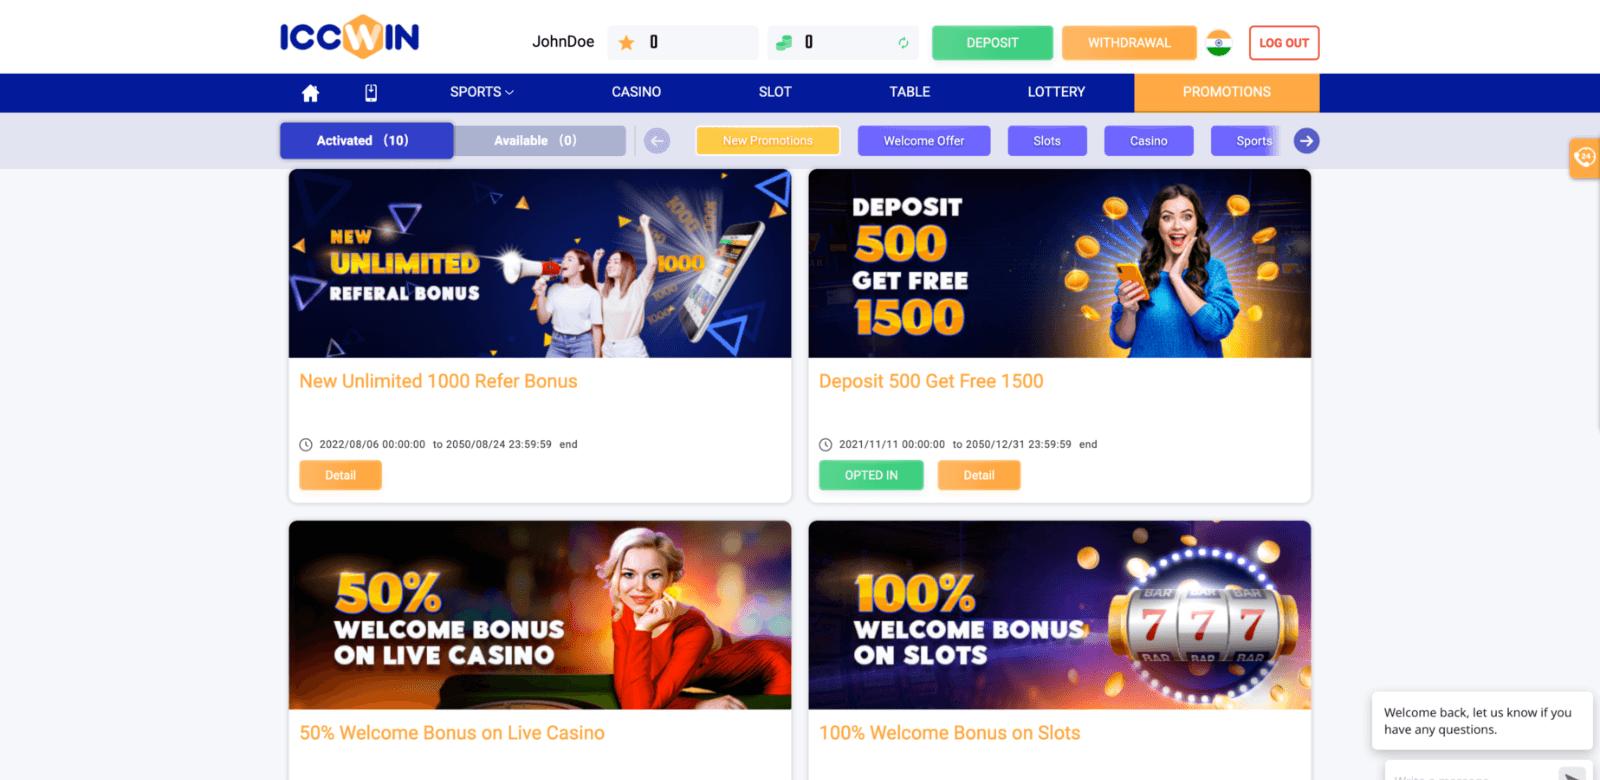 Screenshot of ICCWIN's current promotions for players from India